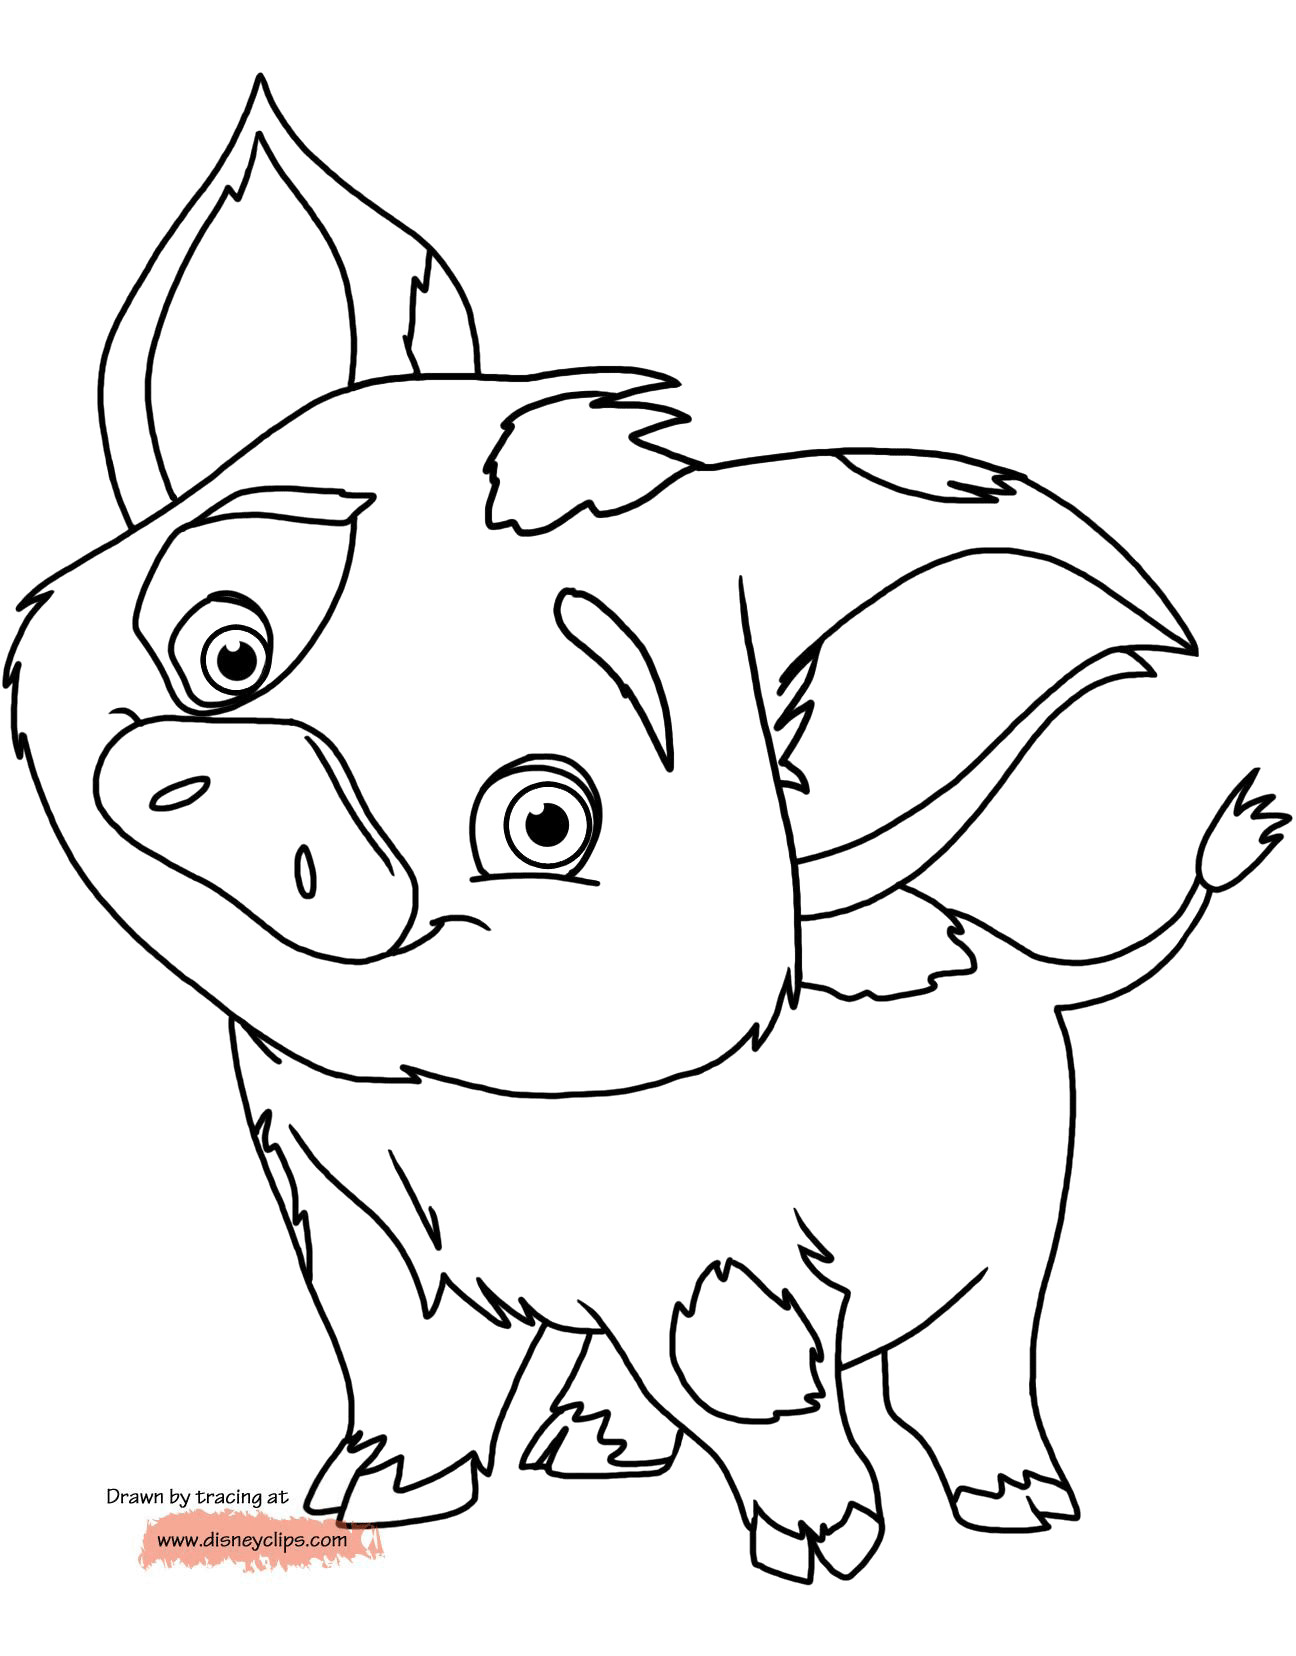 Baby Moana Coloring Pages
 Disney s Moana Coloring Pages